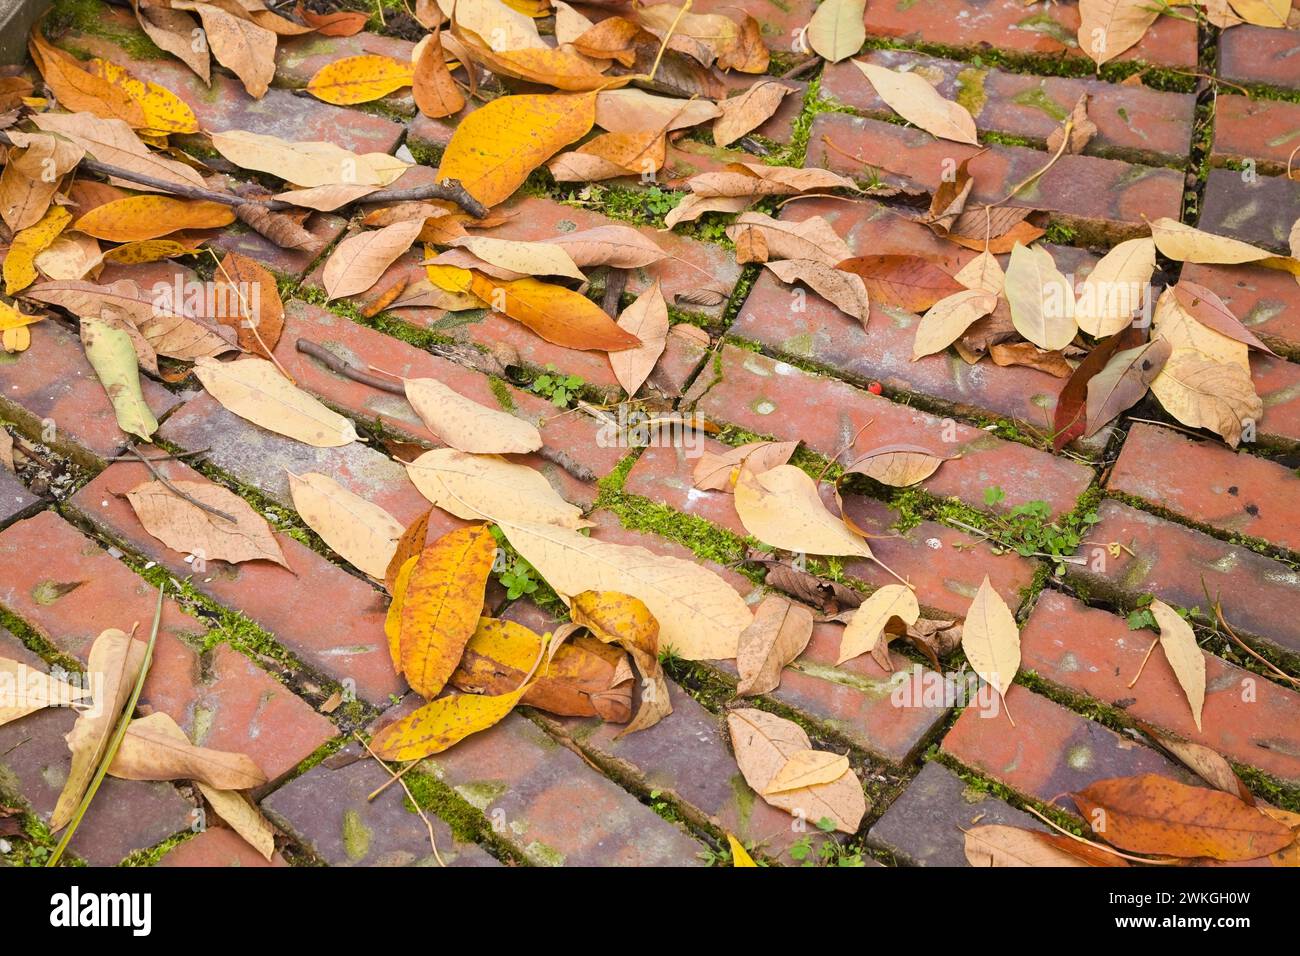 Close-up of fallen deciduous tree leaves on top of footpath made of red bricks in autumn. Stock Photo